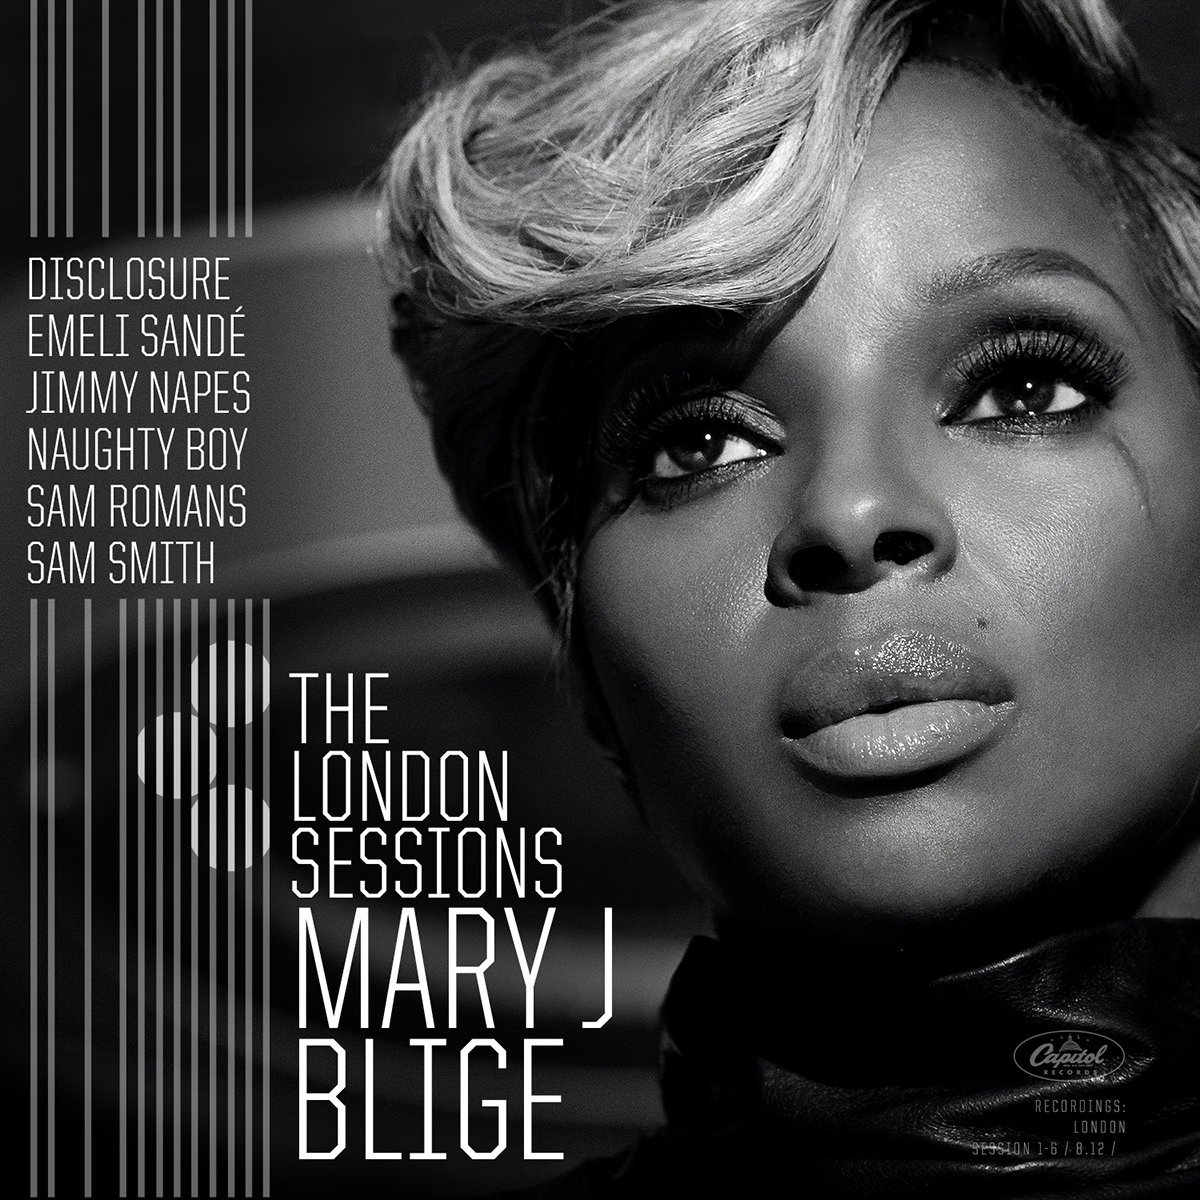 PHOTO: Mary J. Blige's "The London Sessions" album.